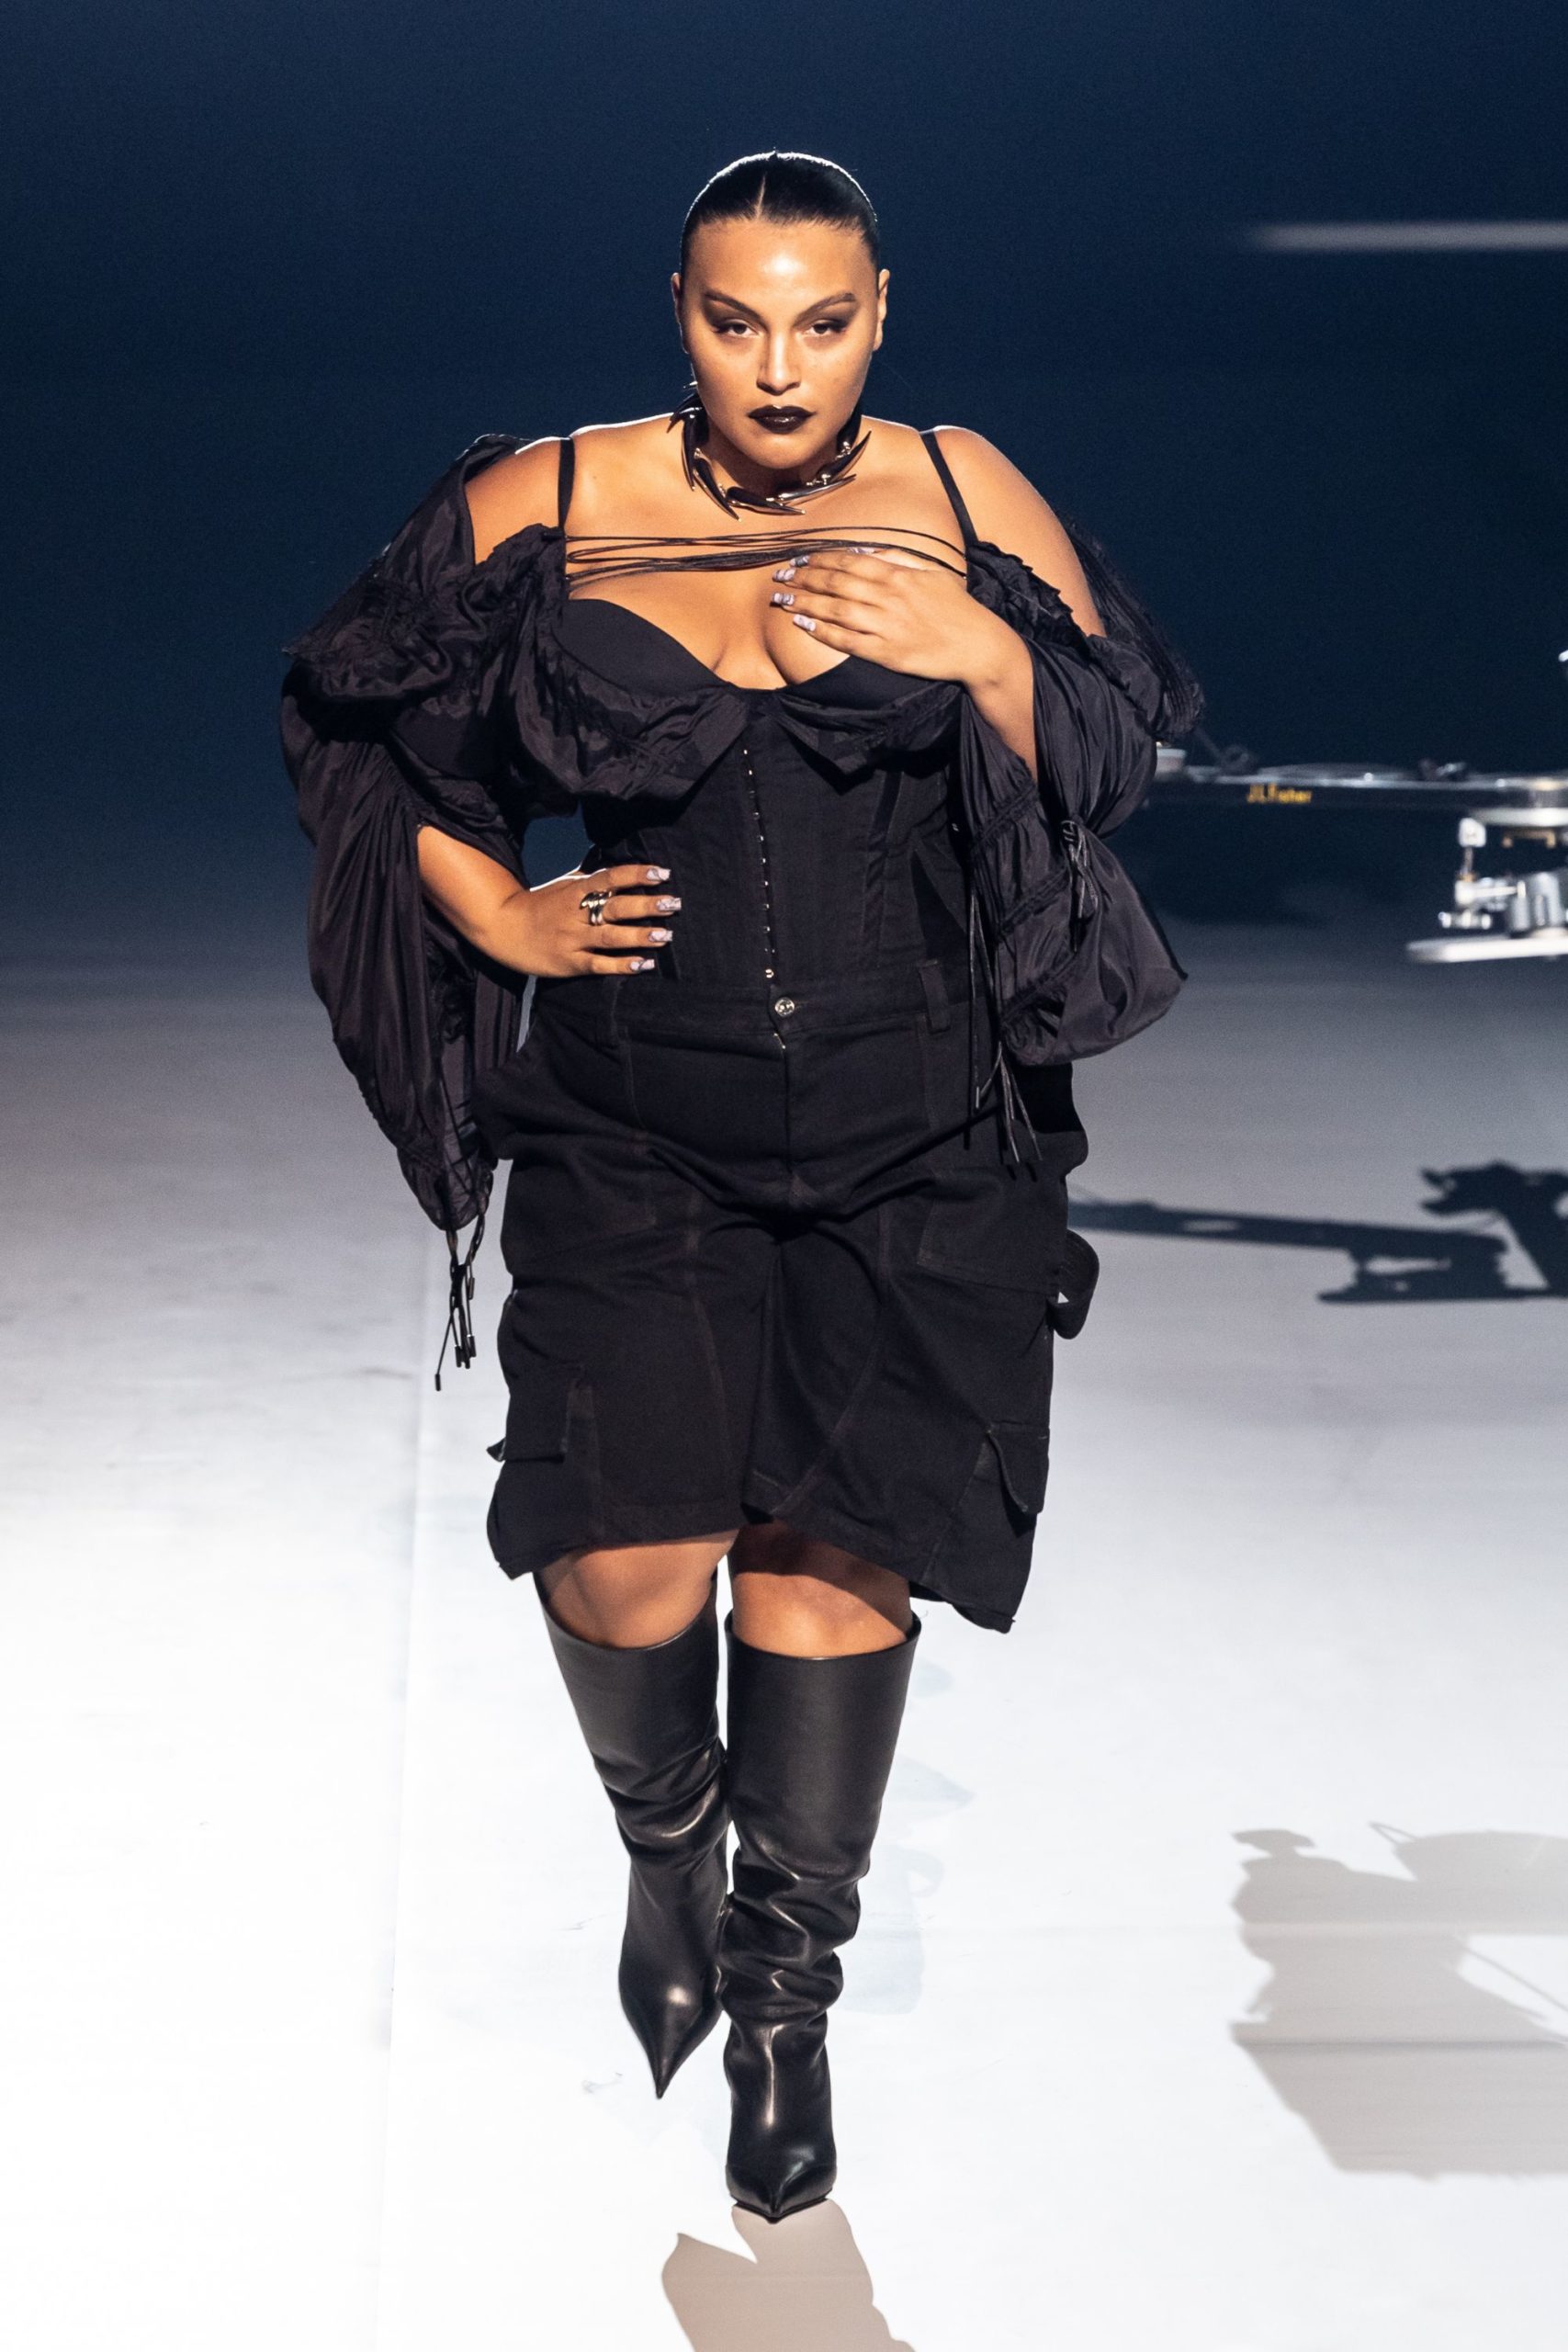 Plus-Size Models Had More Than a Moment During Fashion Month, and